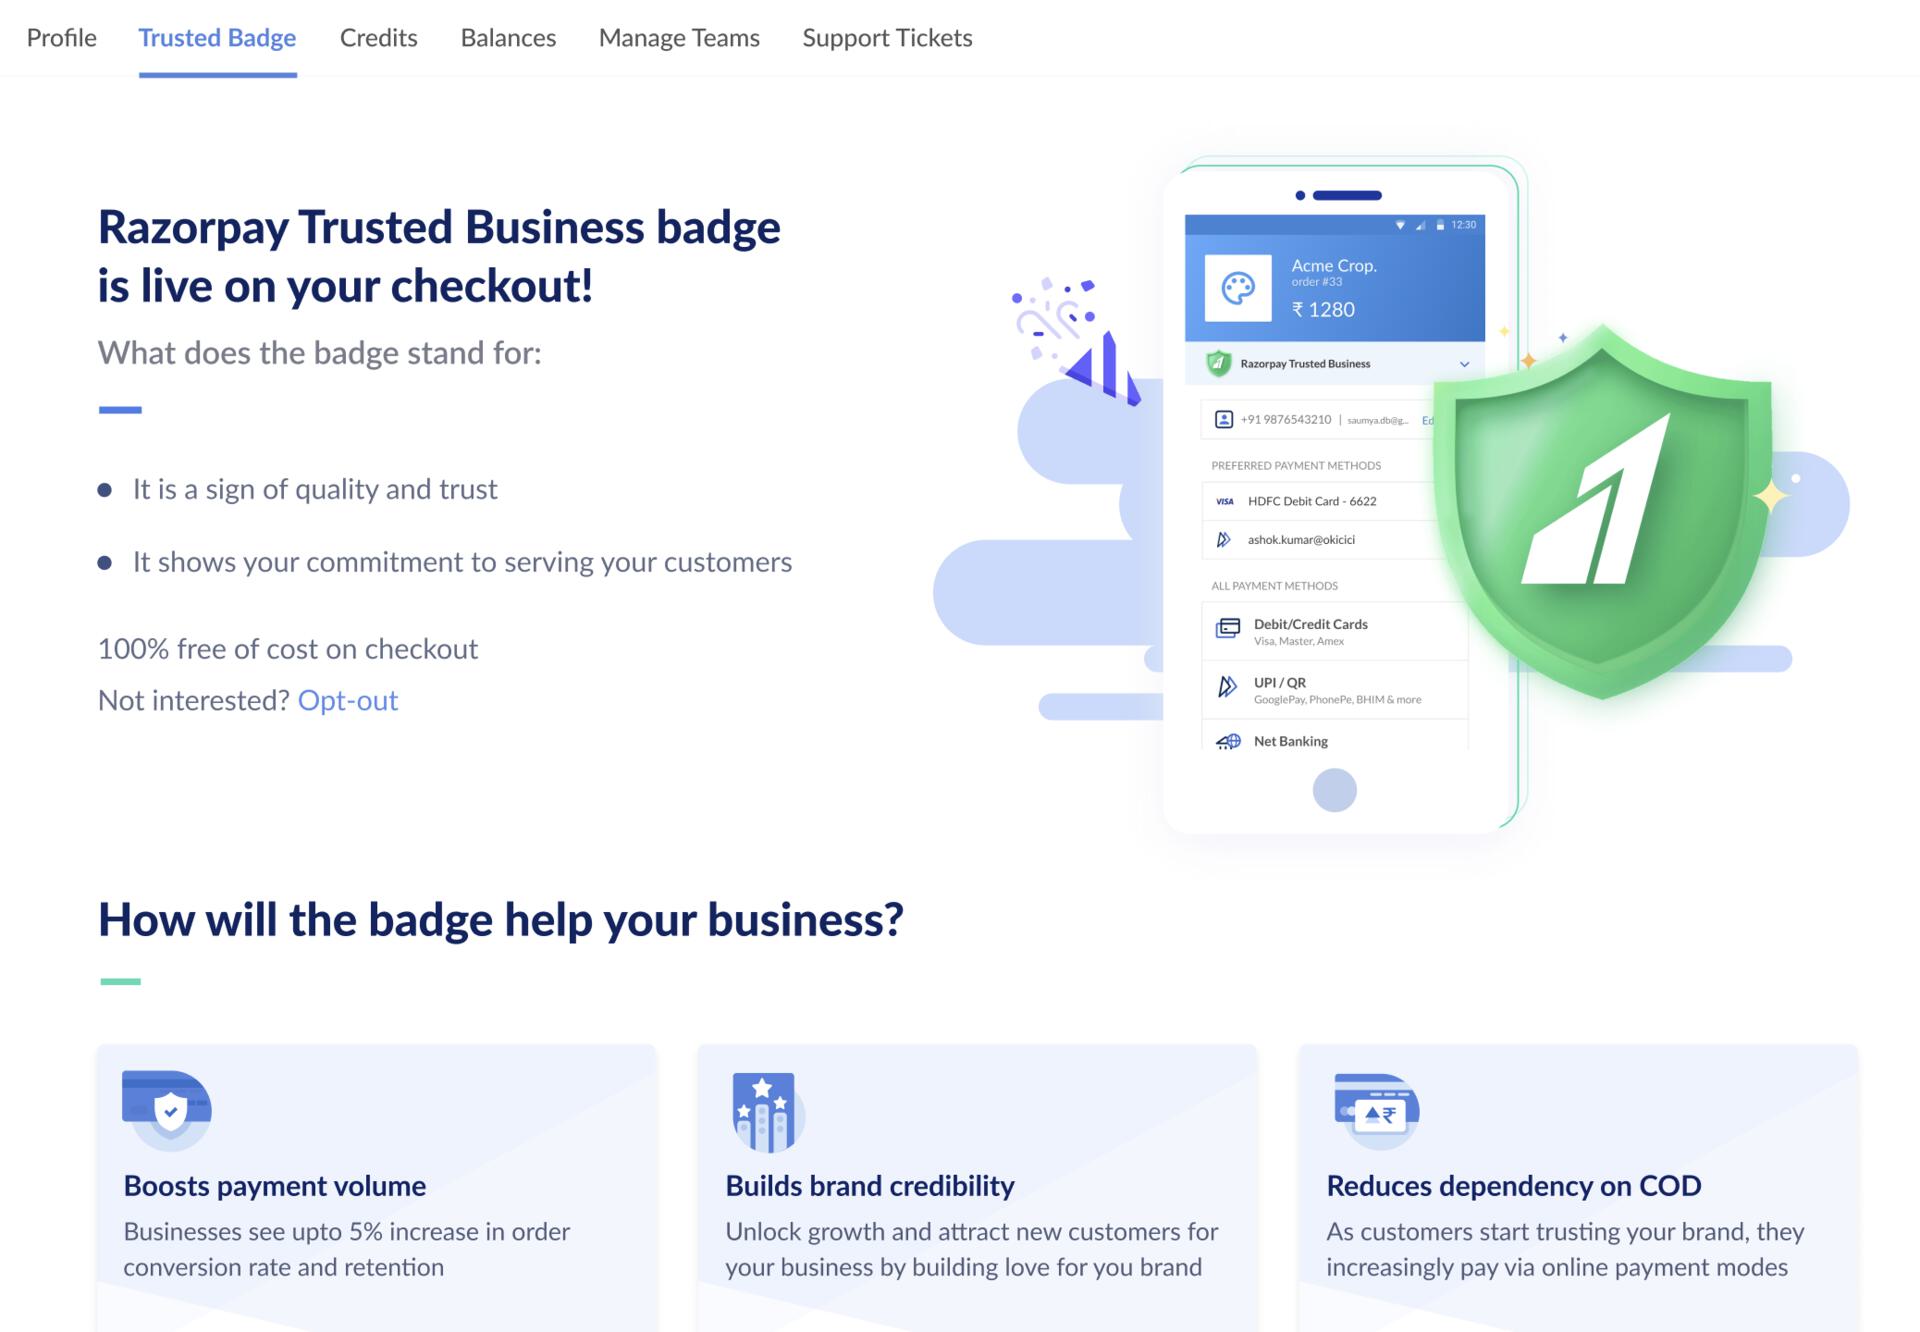 Opt Out of the Razorpay Trusted Business badge program